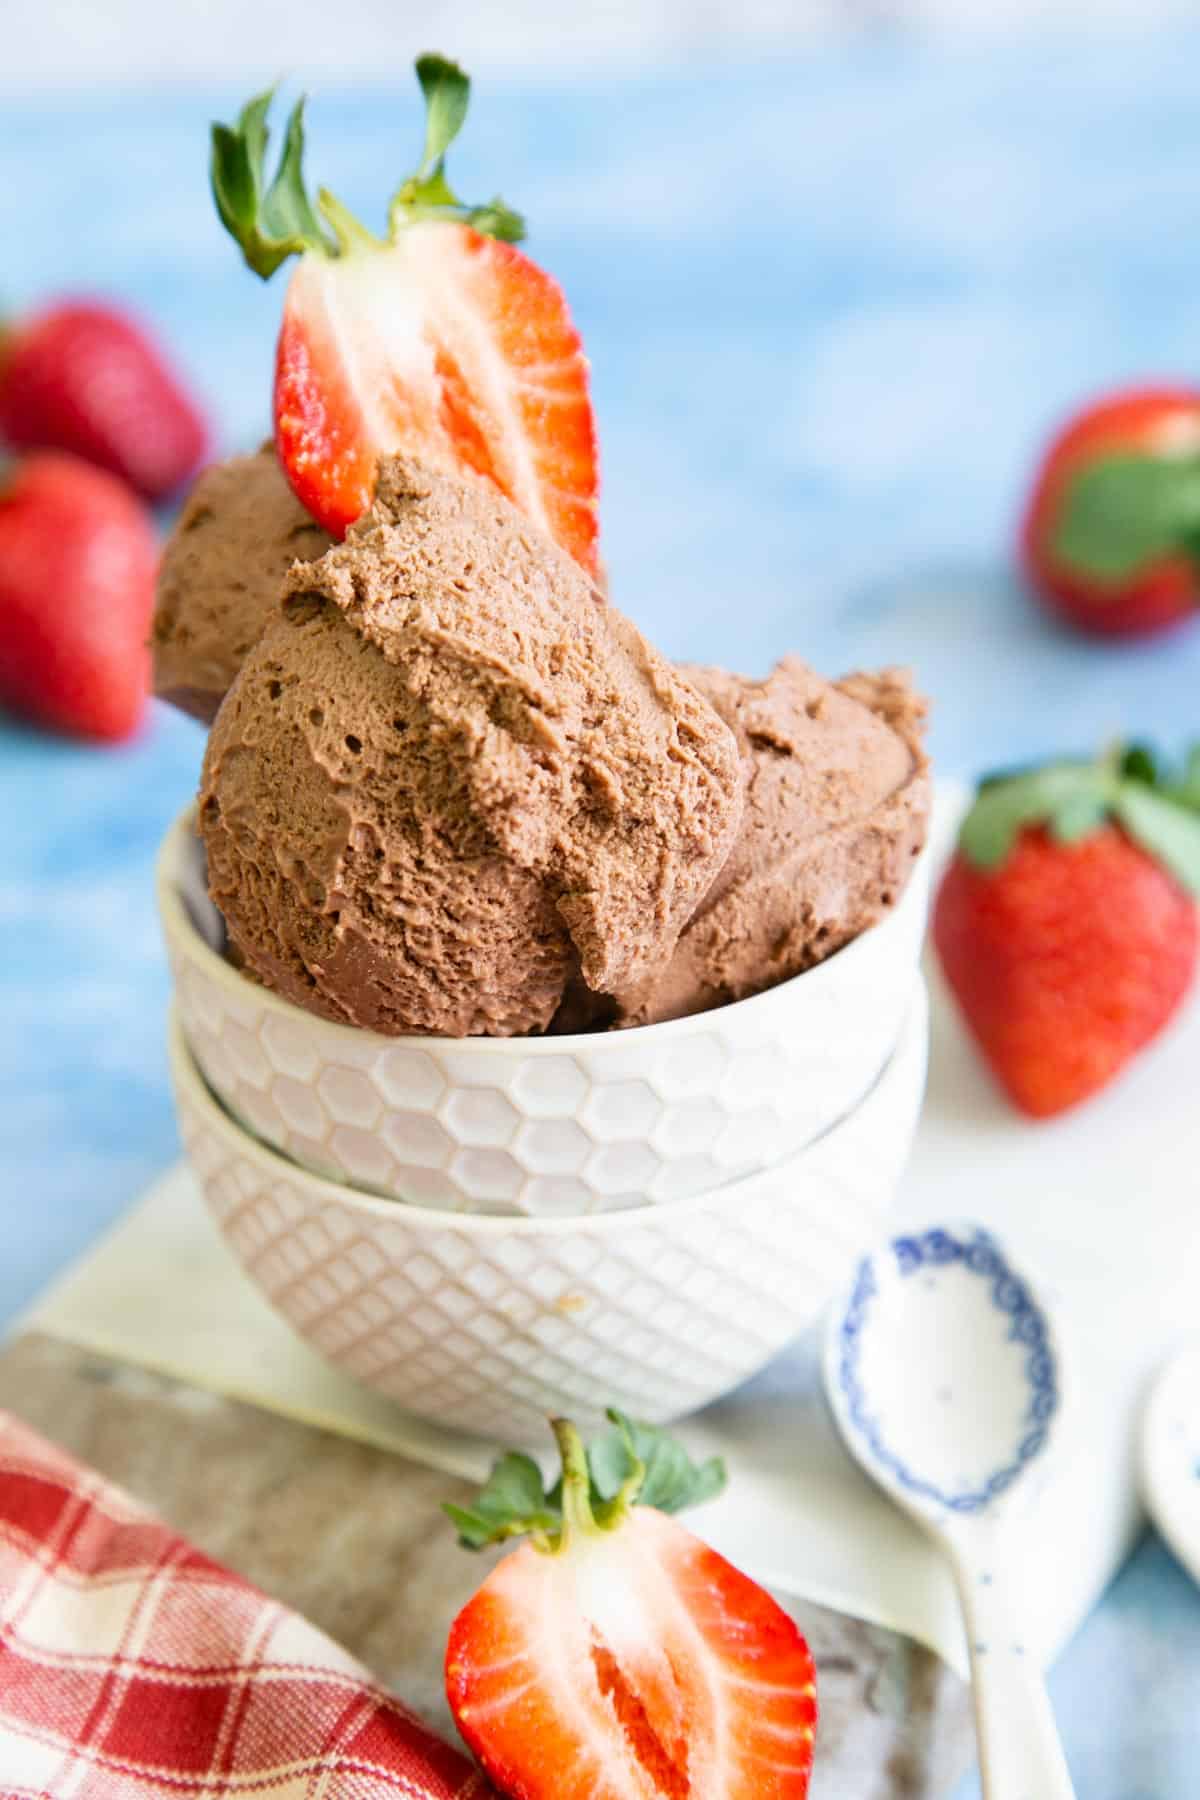 No-churn easy nutella ice cream in a pretty white bowl with strawberries on the side.